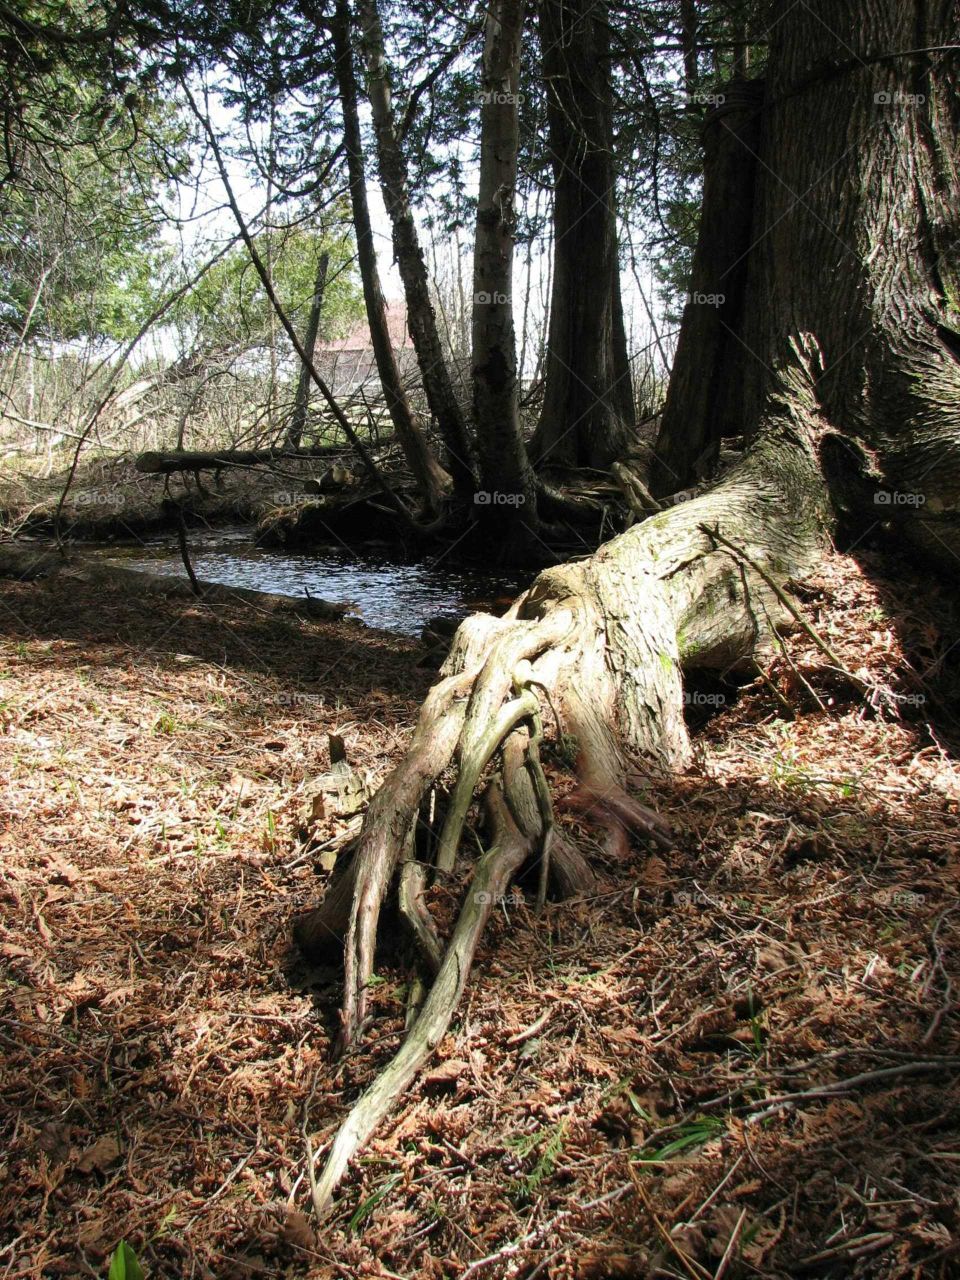 Tree roots with stream